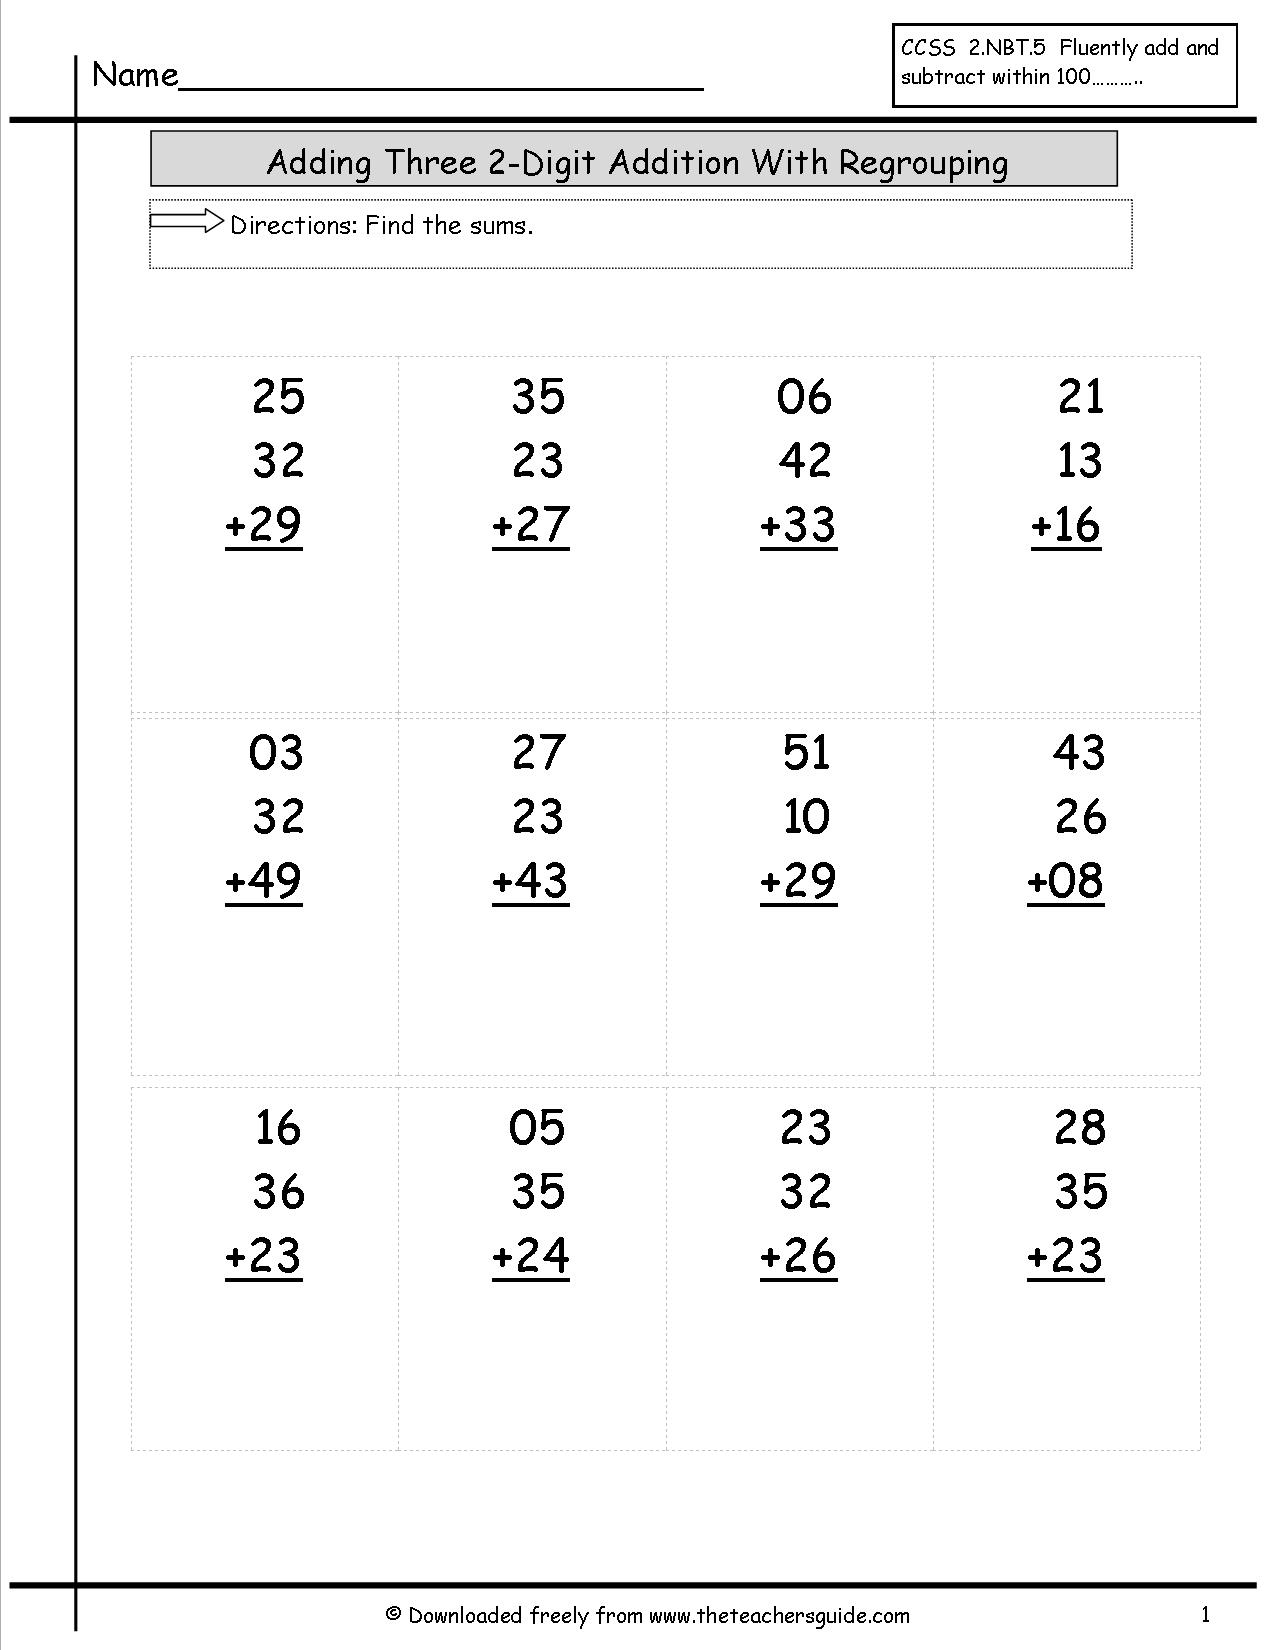 13-best-images-of-adding-three-numbers-worksheets-adding-one-digit